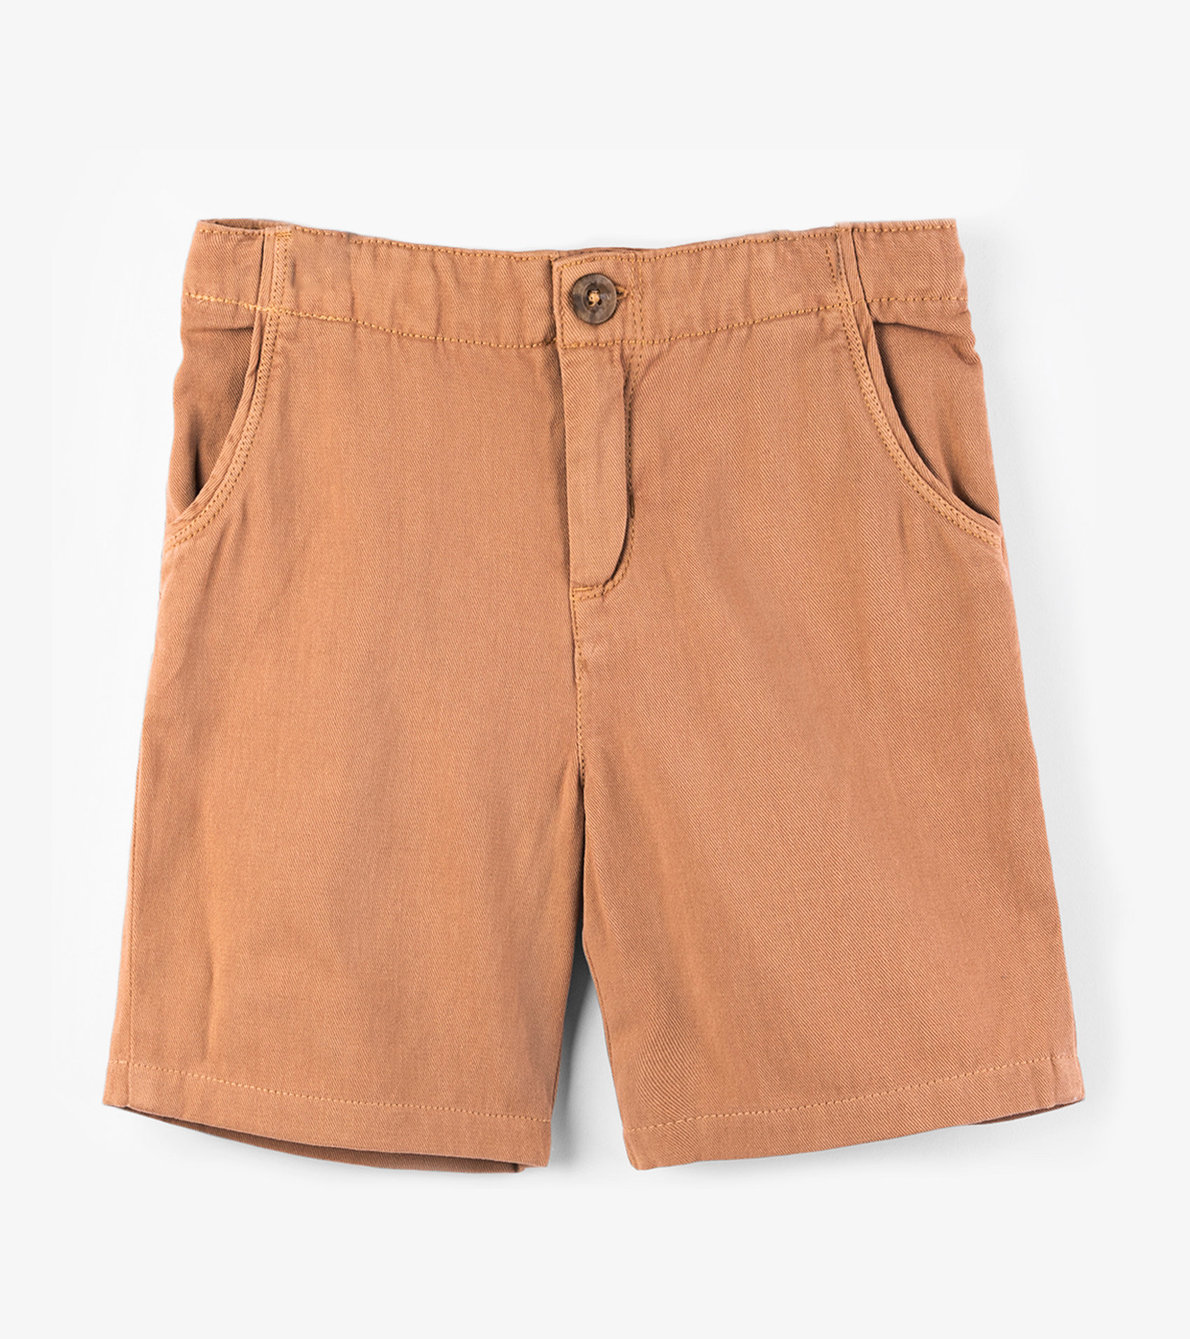 View larger image of Coconut Brown Woven Shorts